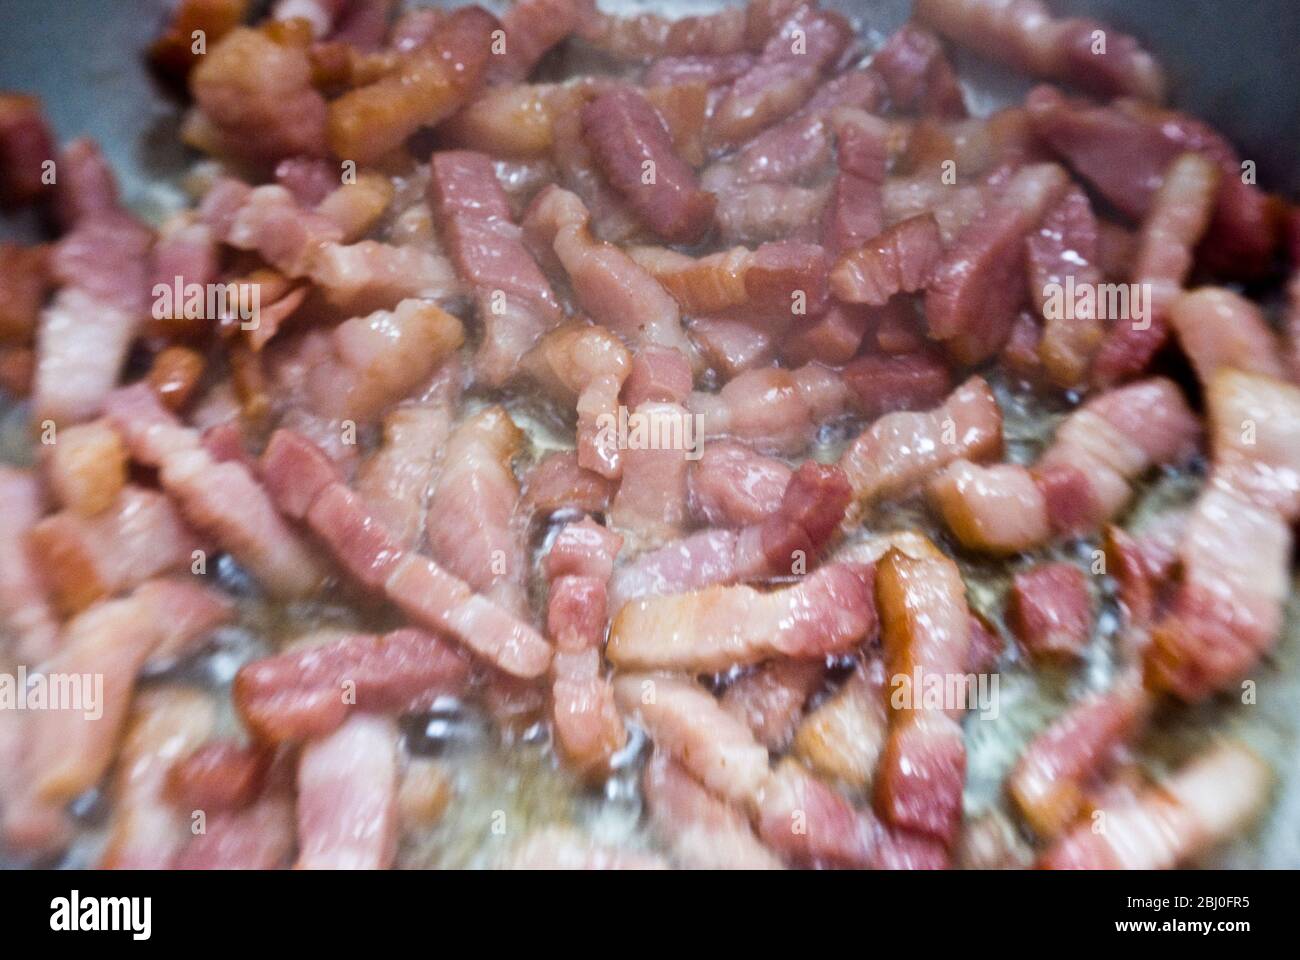 Cooking chopped pieces of streaky bacon in a frying pan. Known as pancetta in Italy and lardons in France - Stock Photo